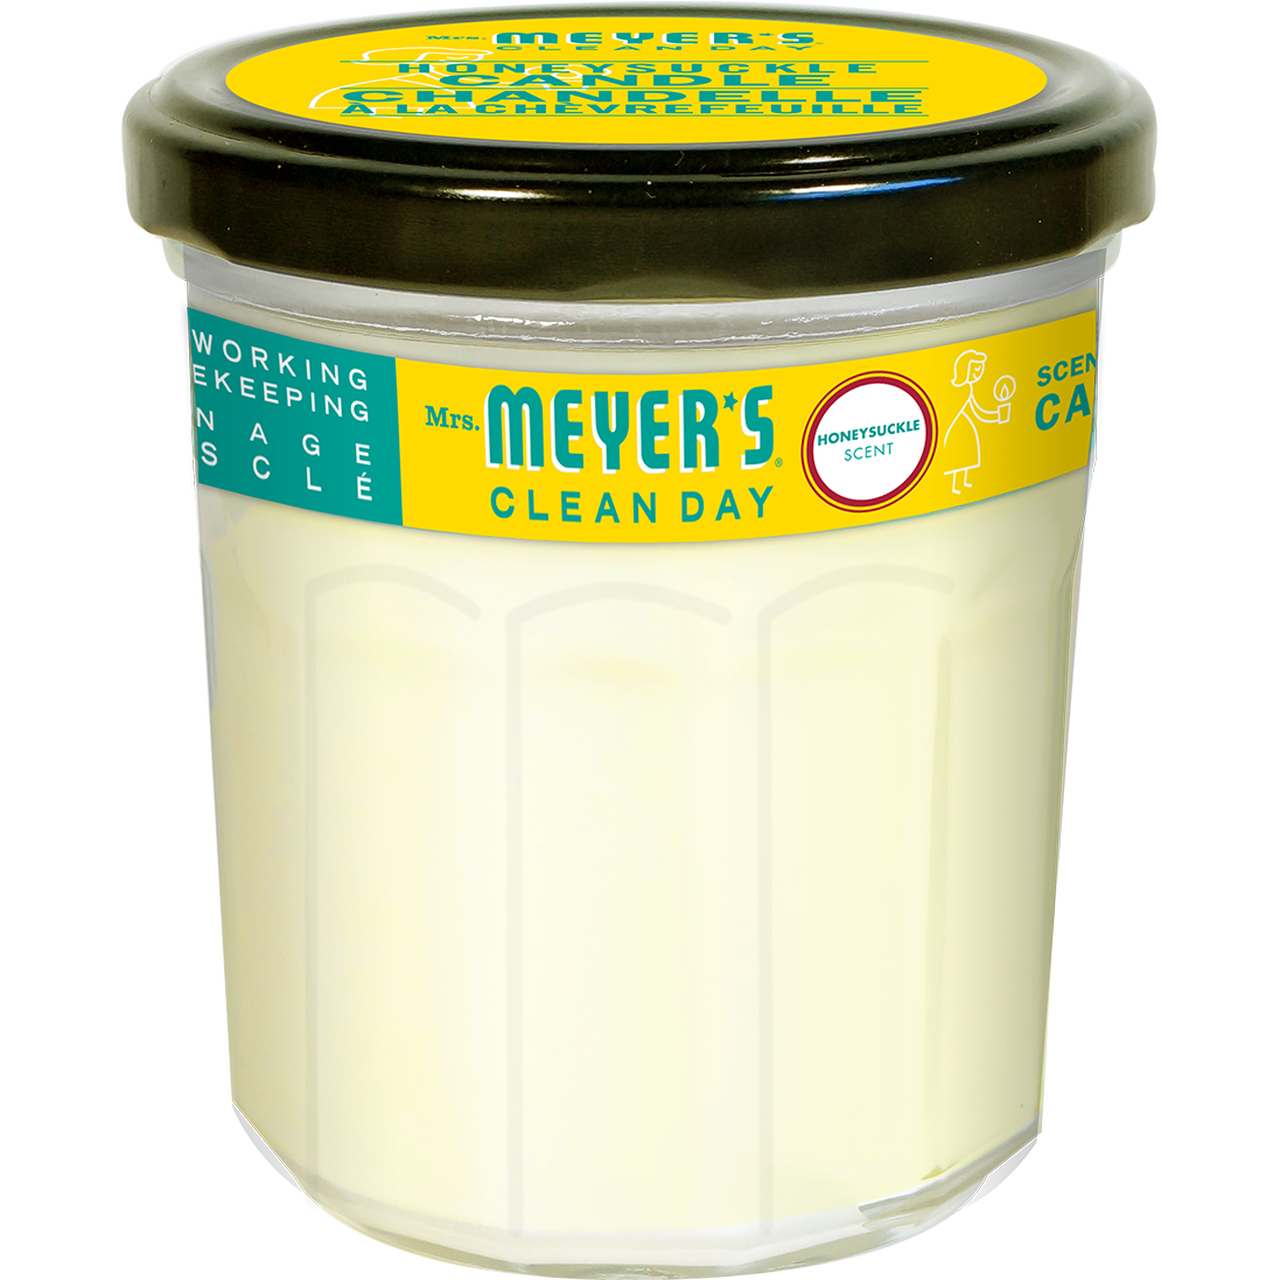 Honeysuckle Soy Candle by Mrs. Meyer's 7.2oz